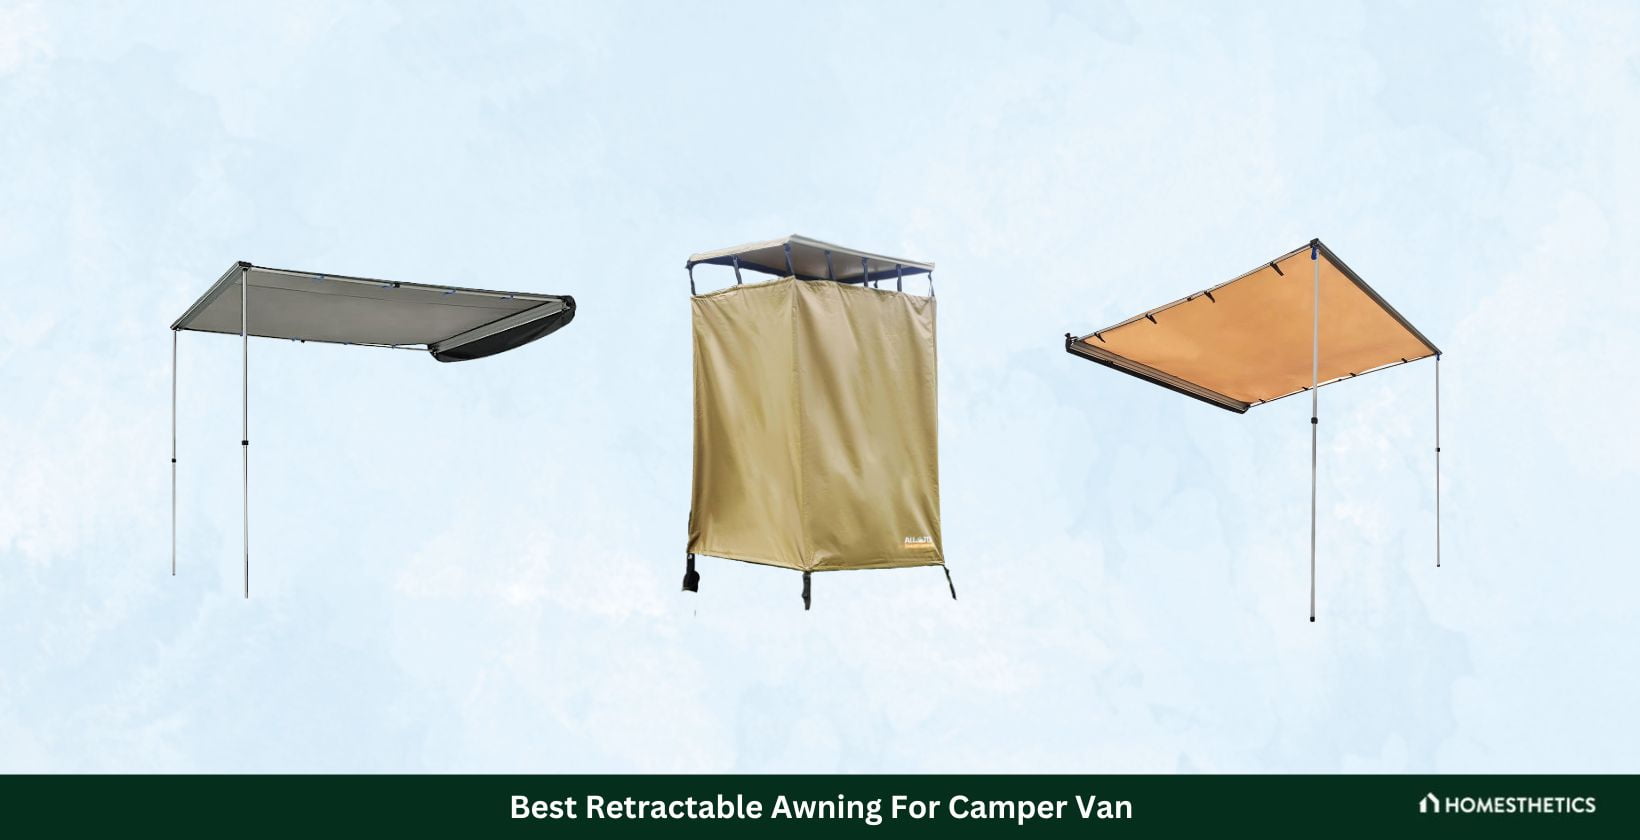 Best Retractable Awning For Camper Van